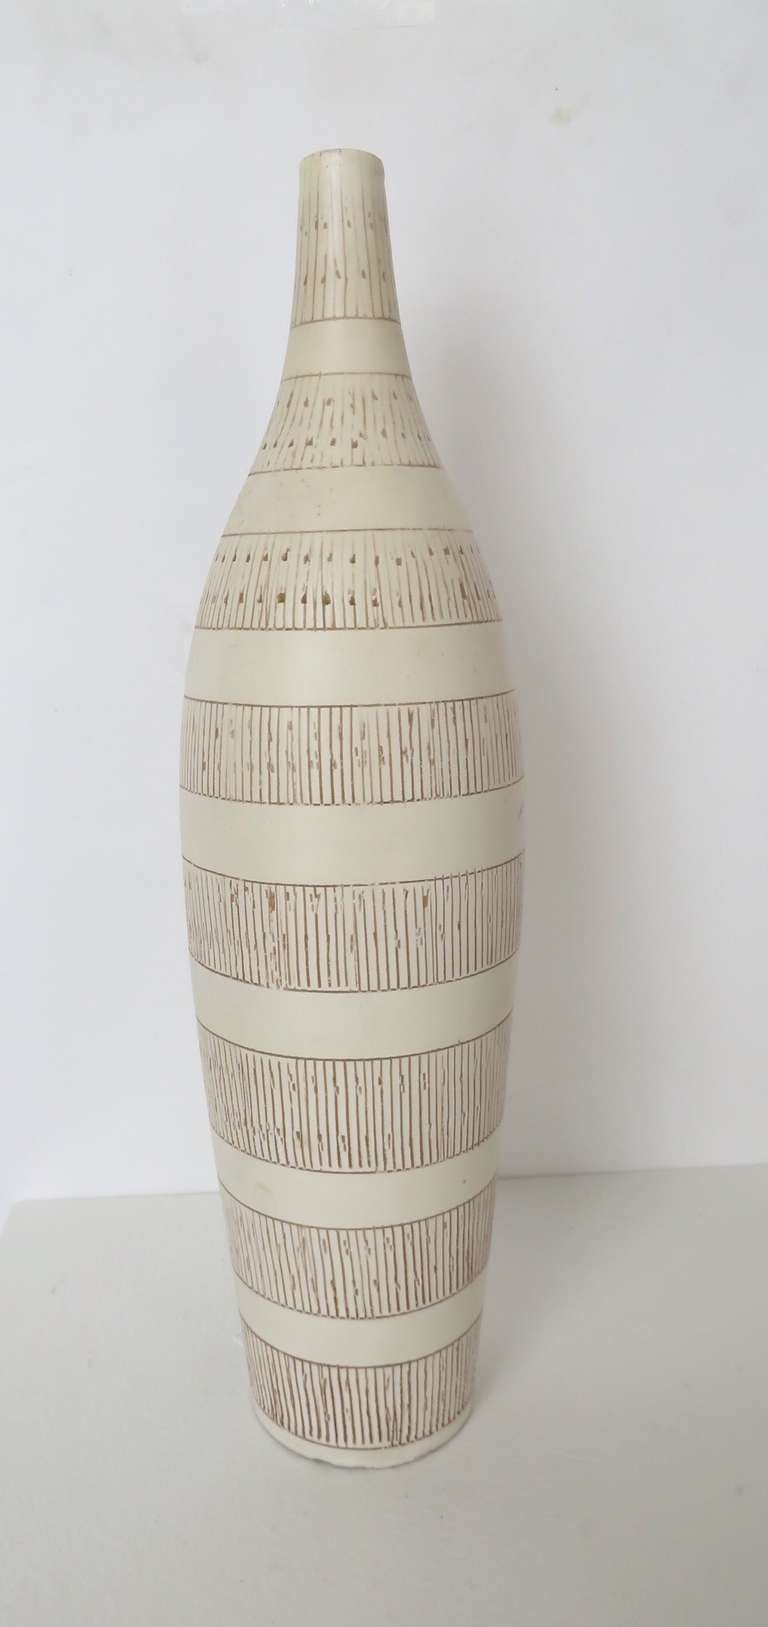 White scrafitto glazed Italian ceramic bottle. Minimal color palette with scrafitto incising revealing the terra cotta clay.  Most likely by Raymor. Label missing. In wonderful condition.